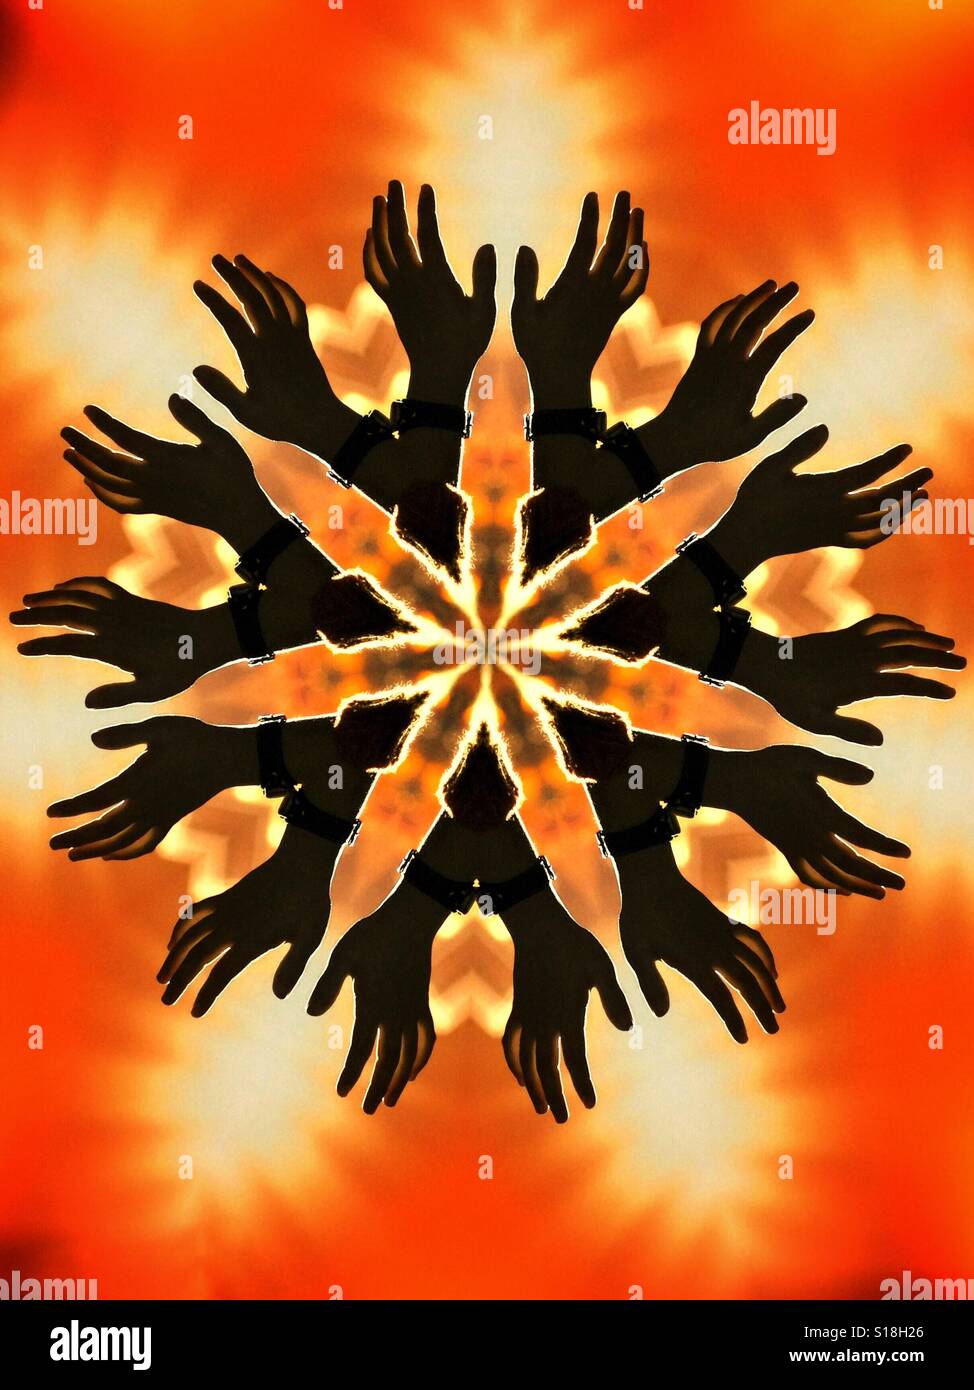 An abstract kaleidoscopic image featuring silhouetted hands on a fiery orange background Stock Photo